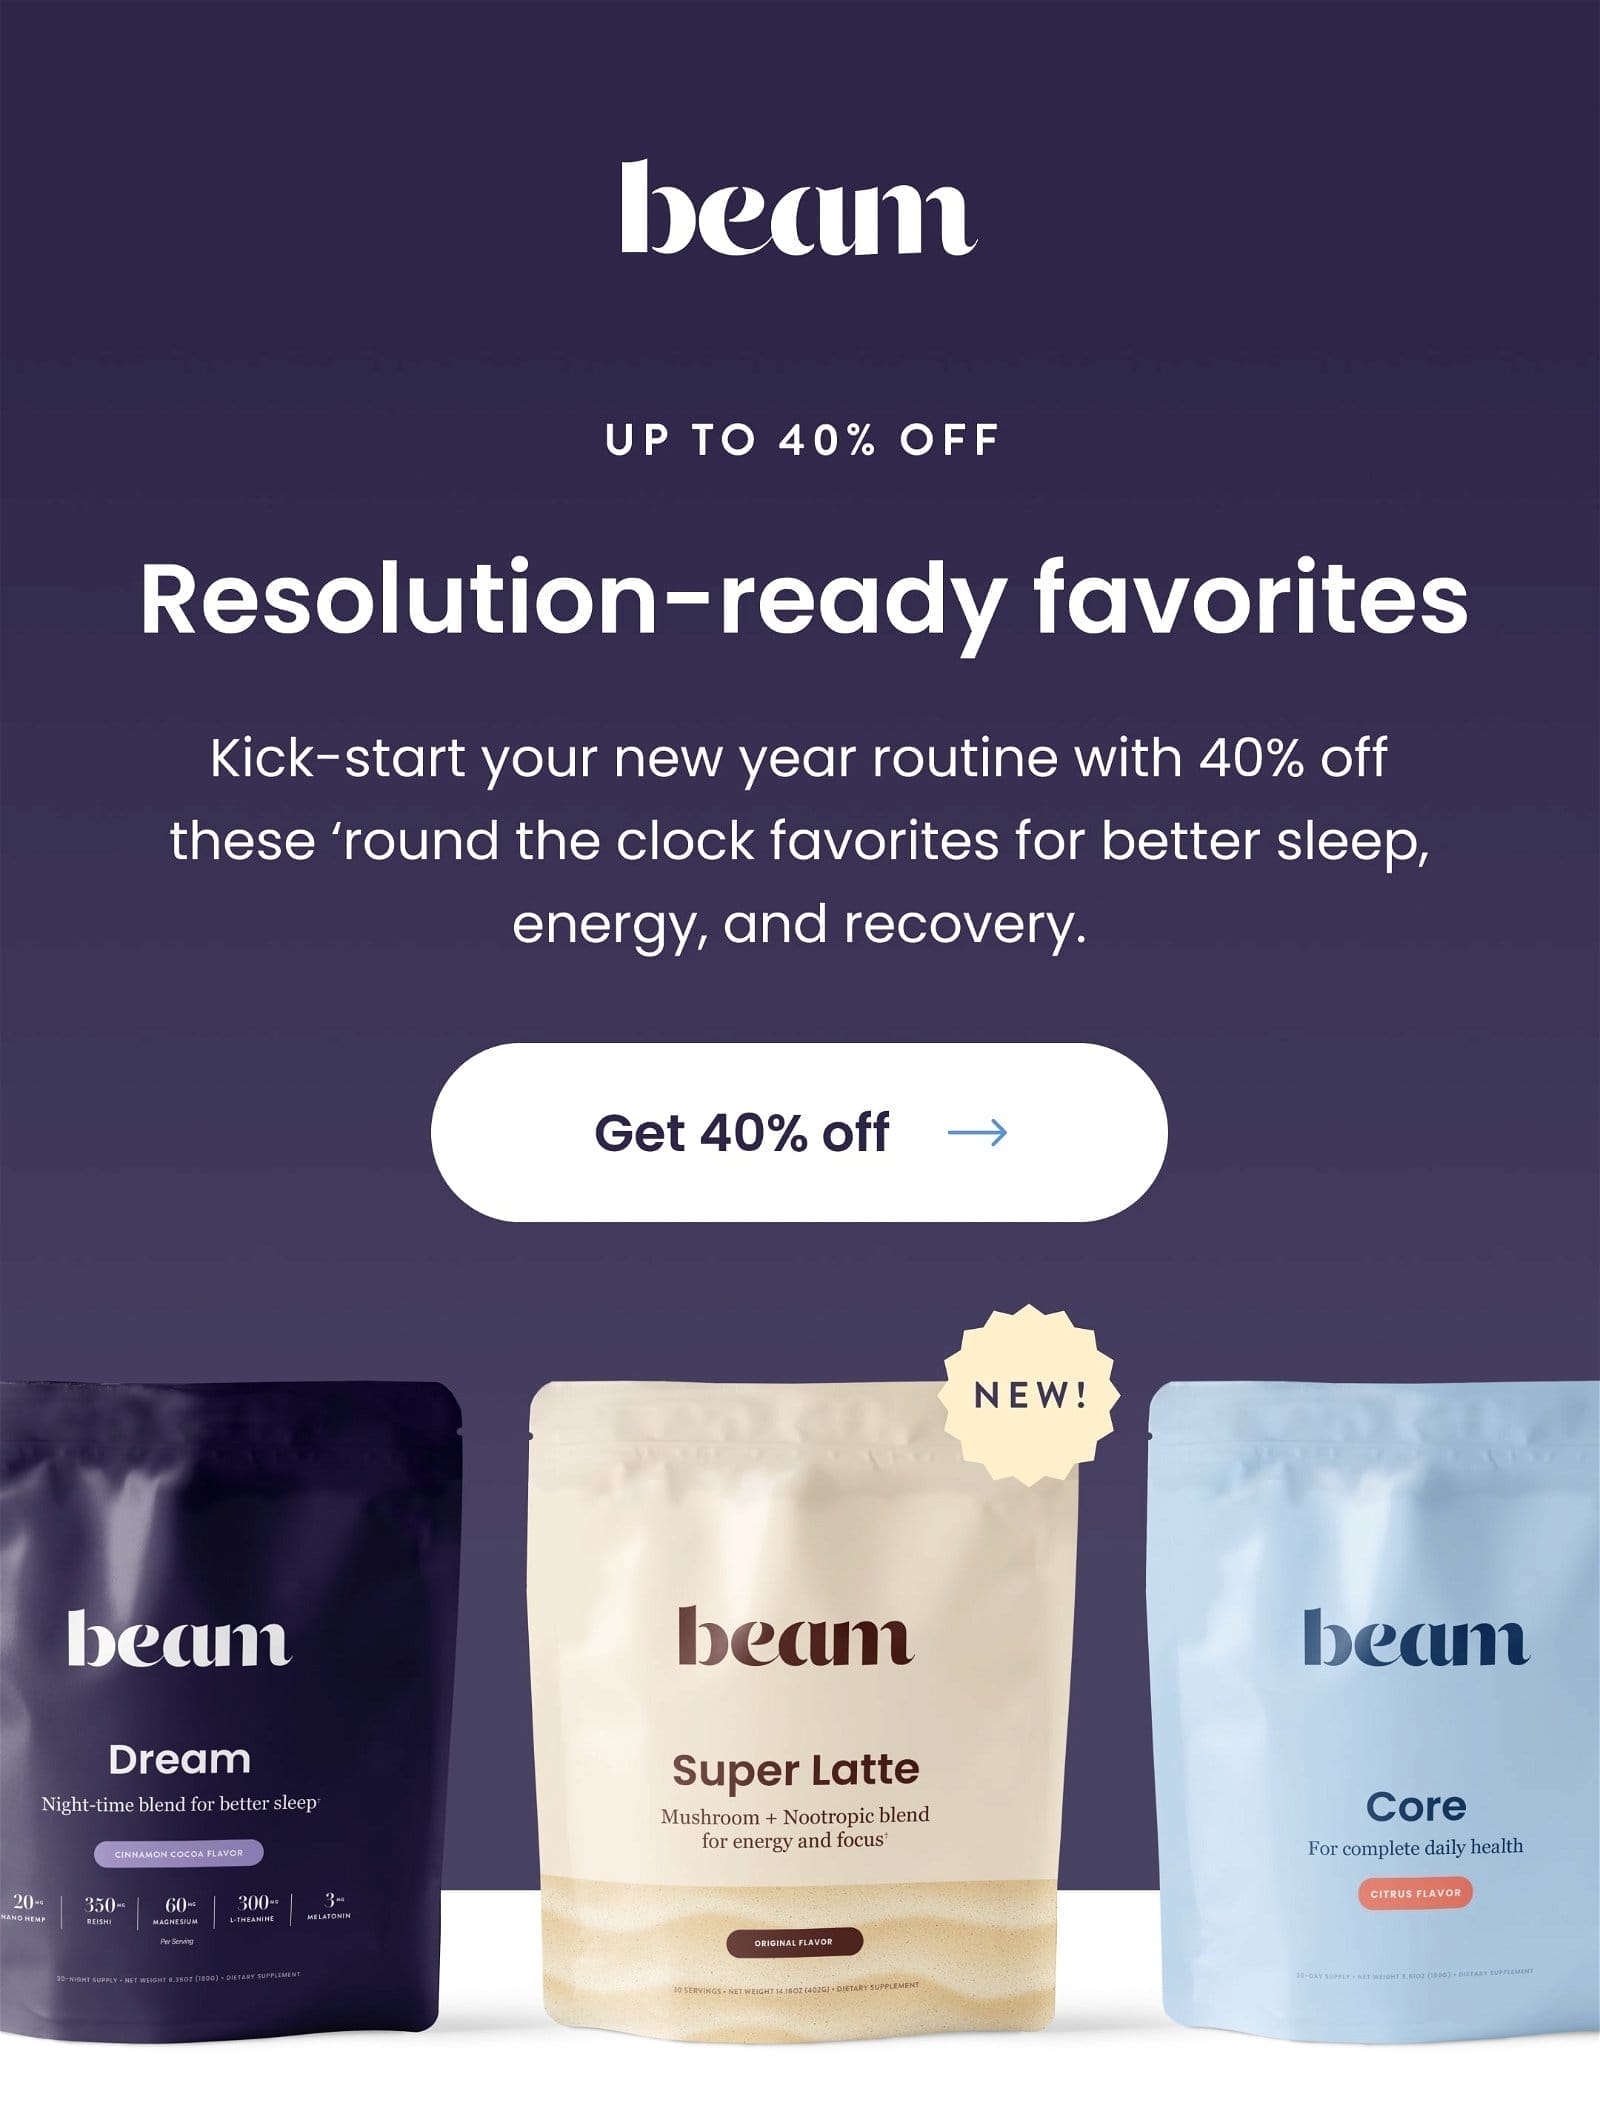 Kick-start your new year routine with 40% off these ‘round the clock favorites for better sleep, energy, and recovery.